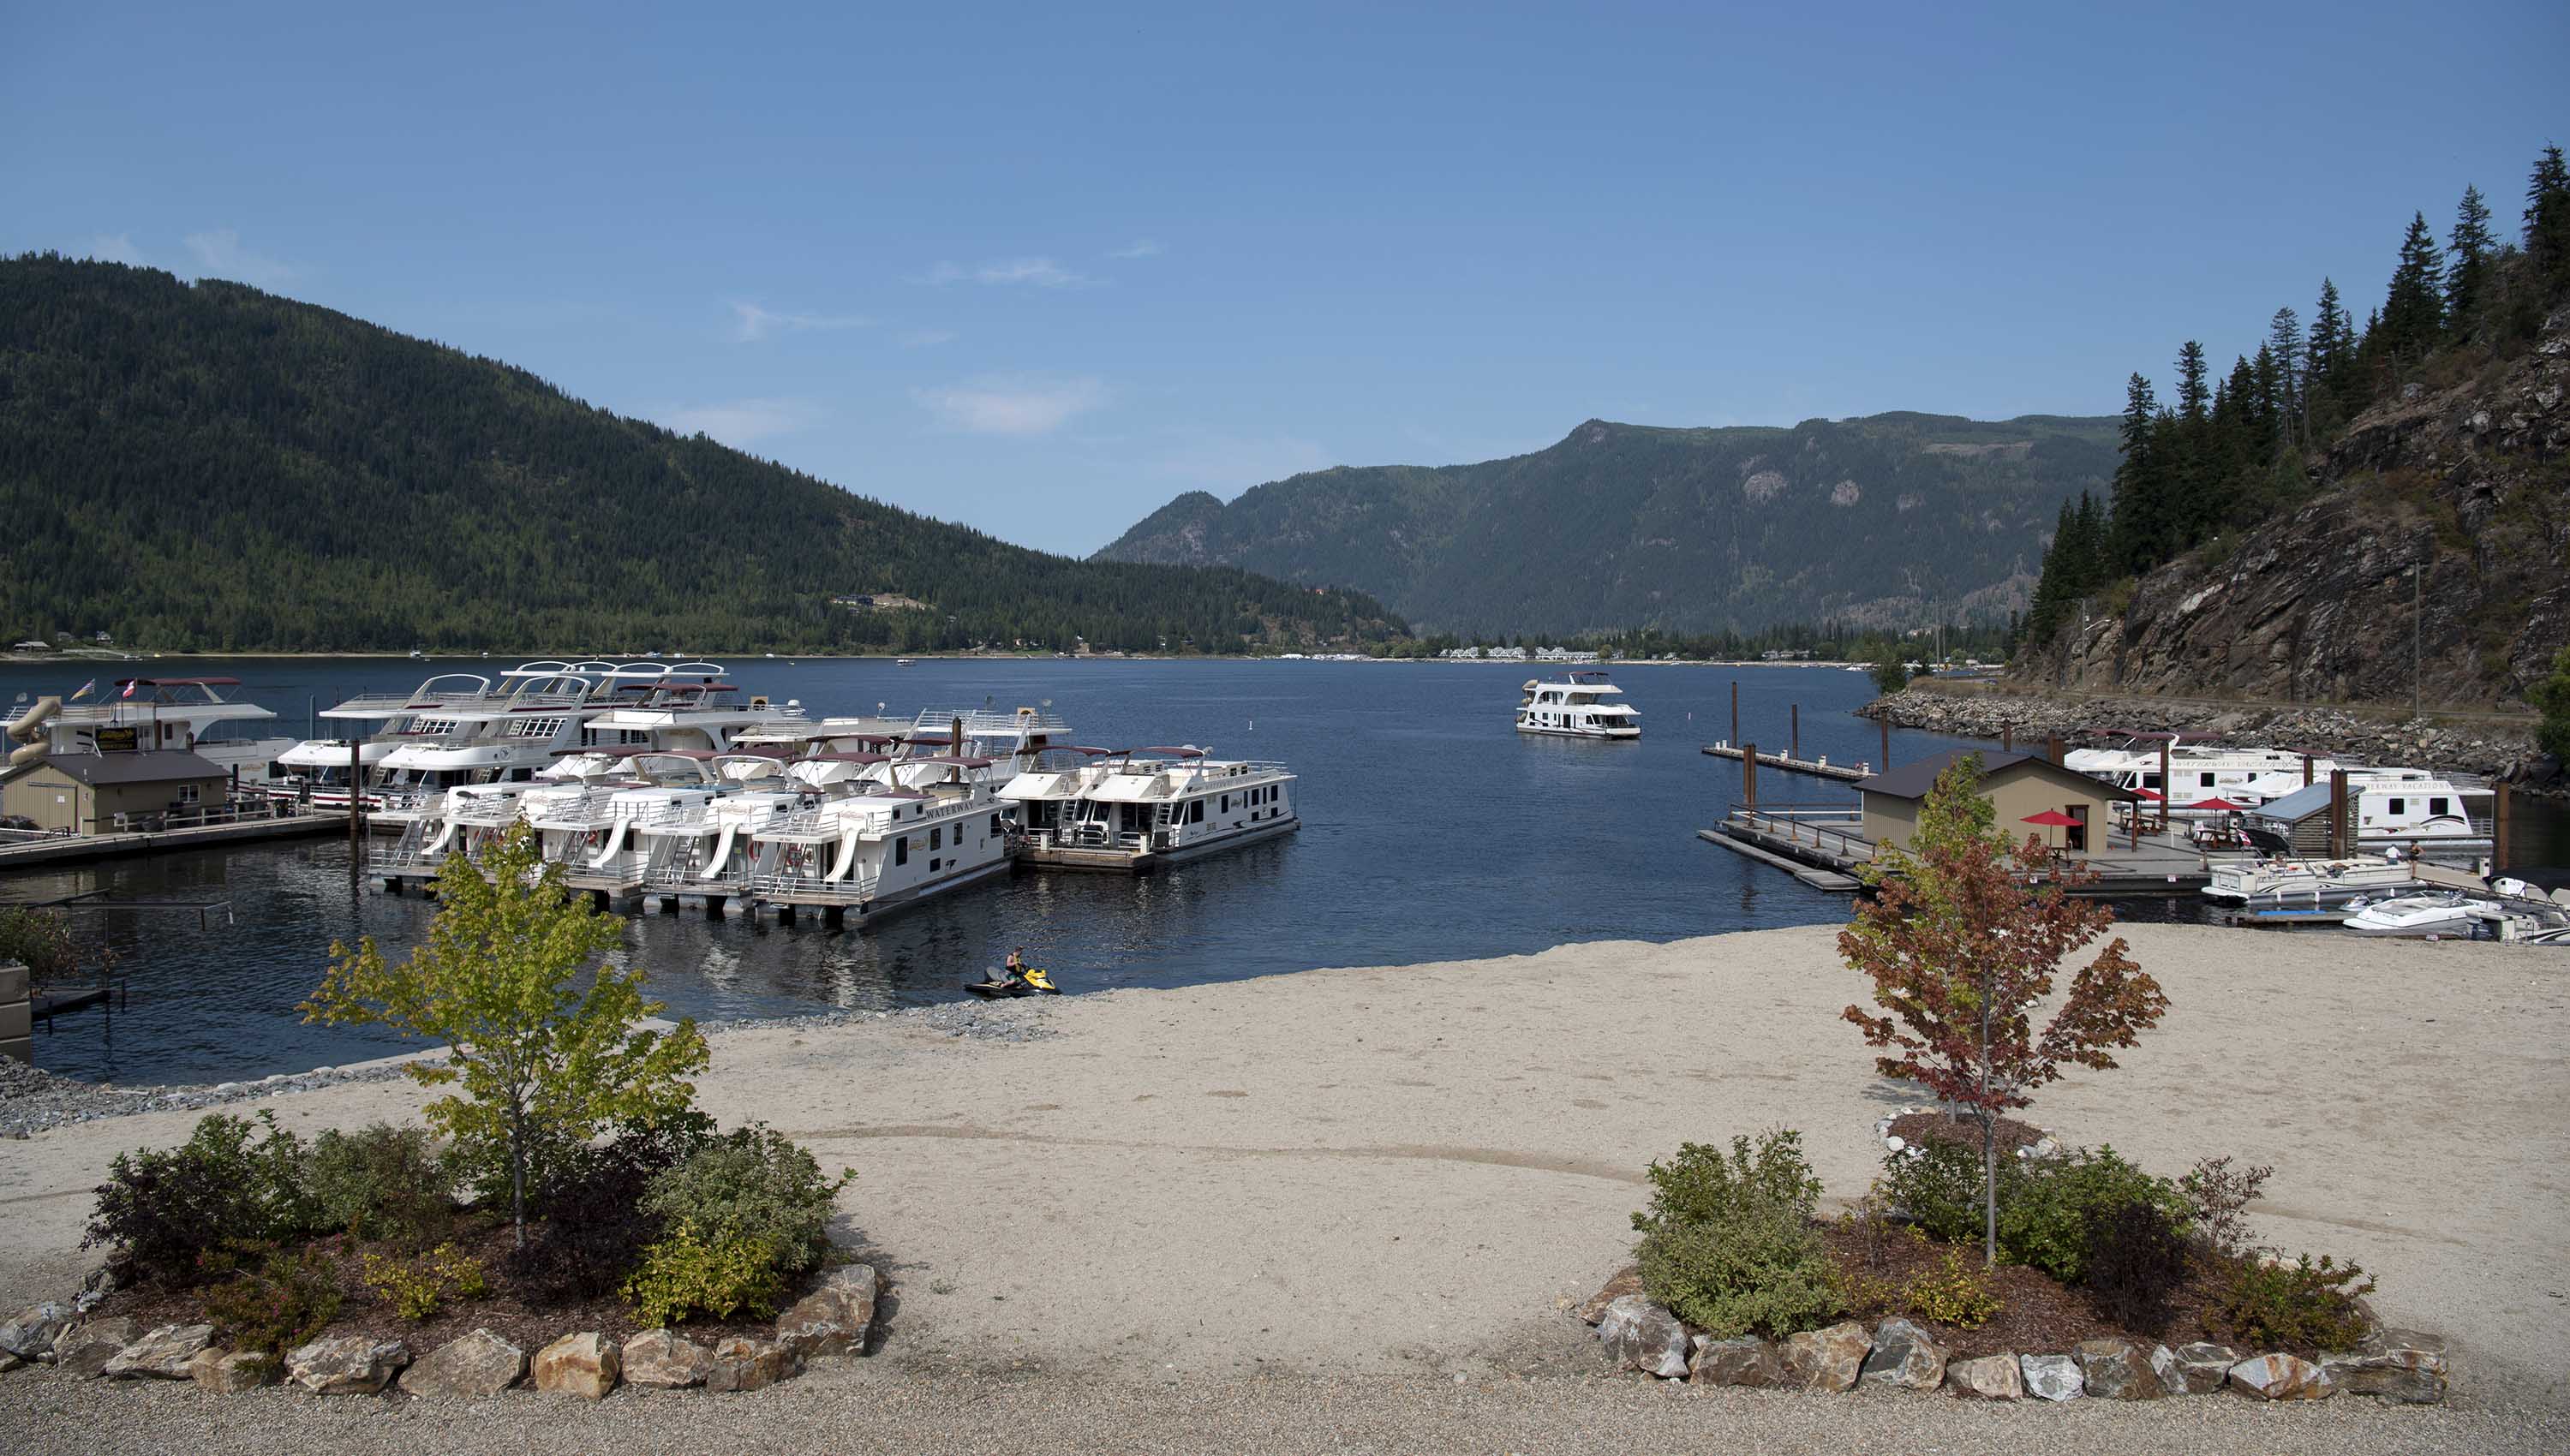 Sicamous Houseboats marine with houseboats docked at the marine.